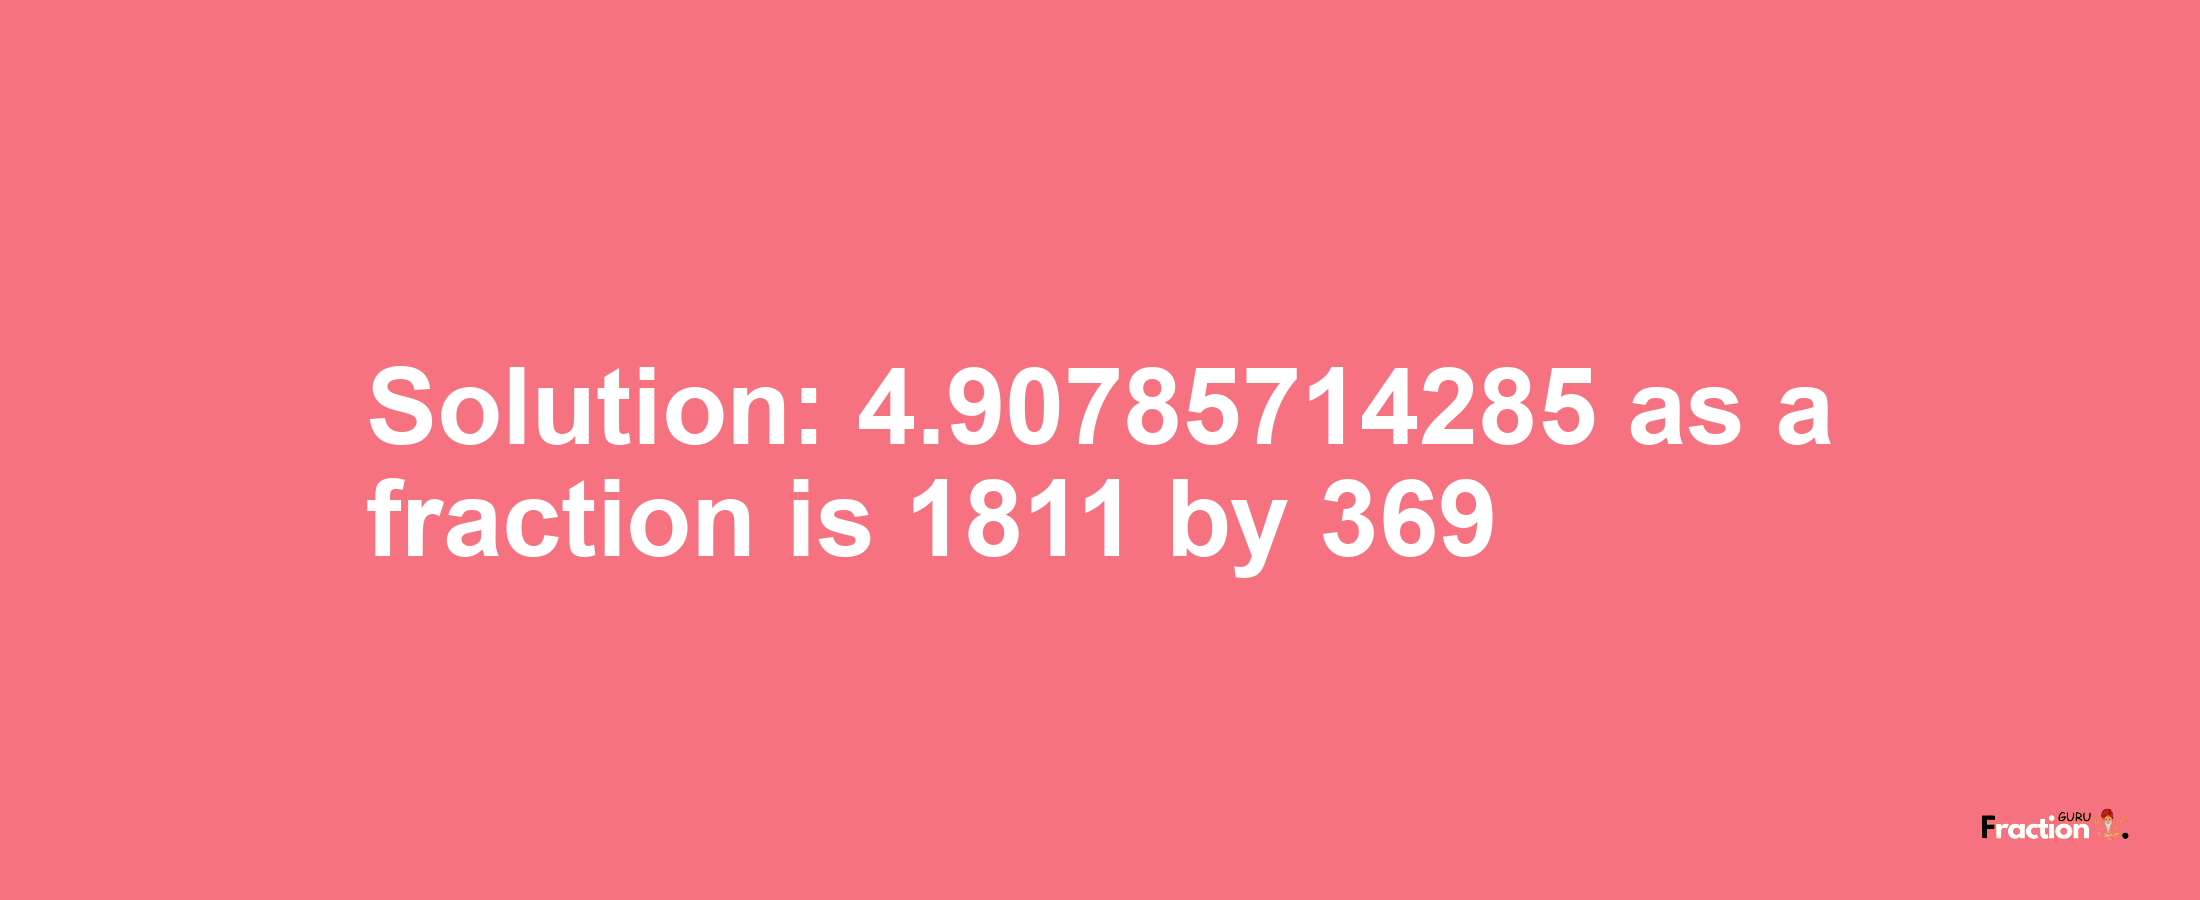 Solution:4.90785714285 as a fraction is 1811/369